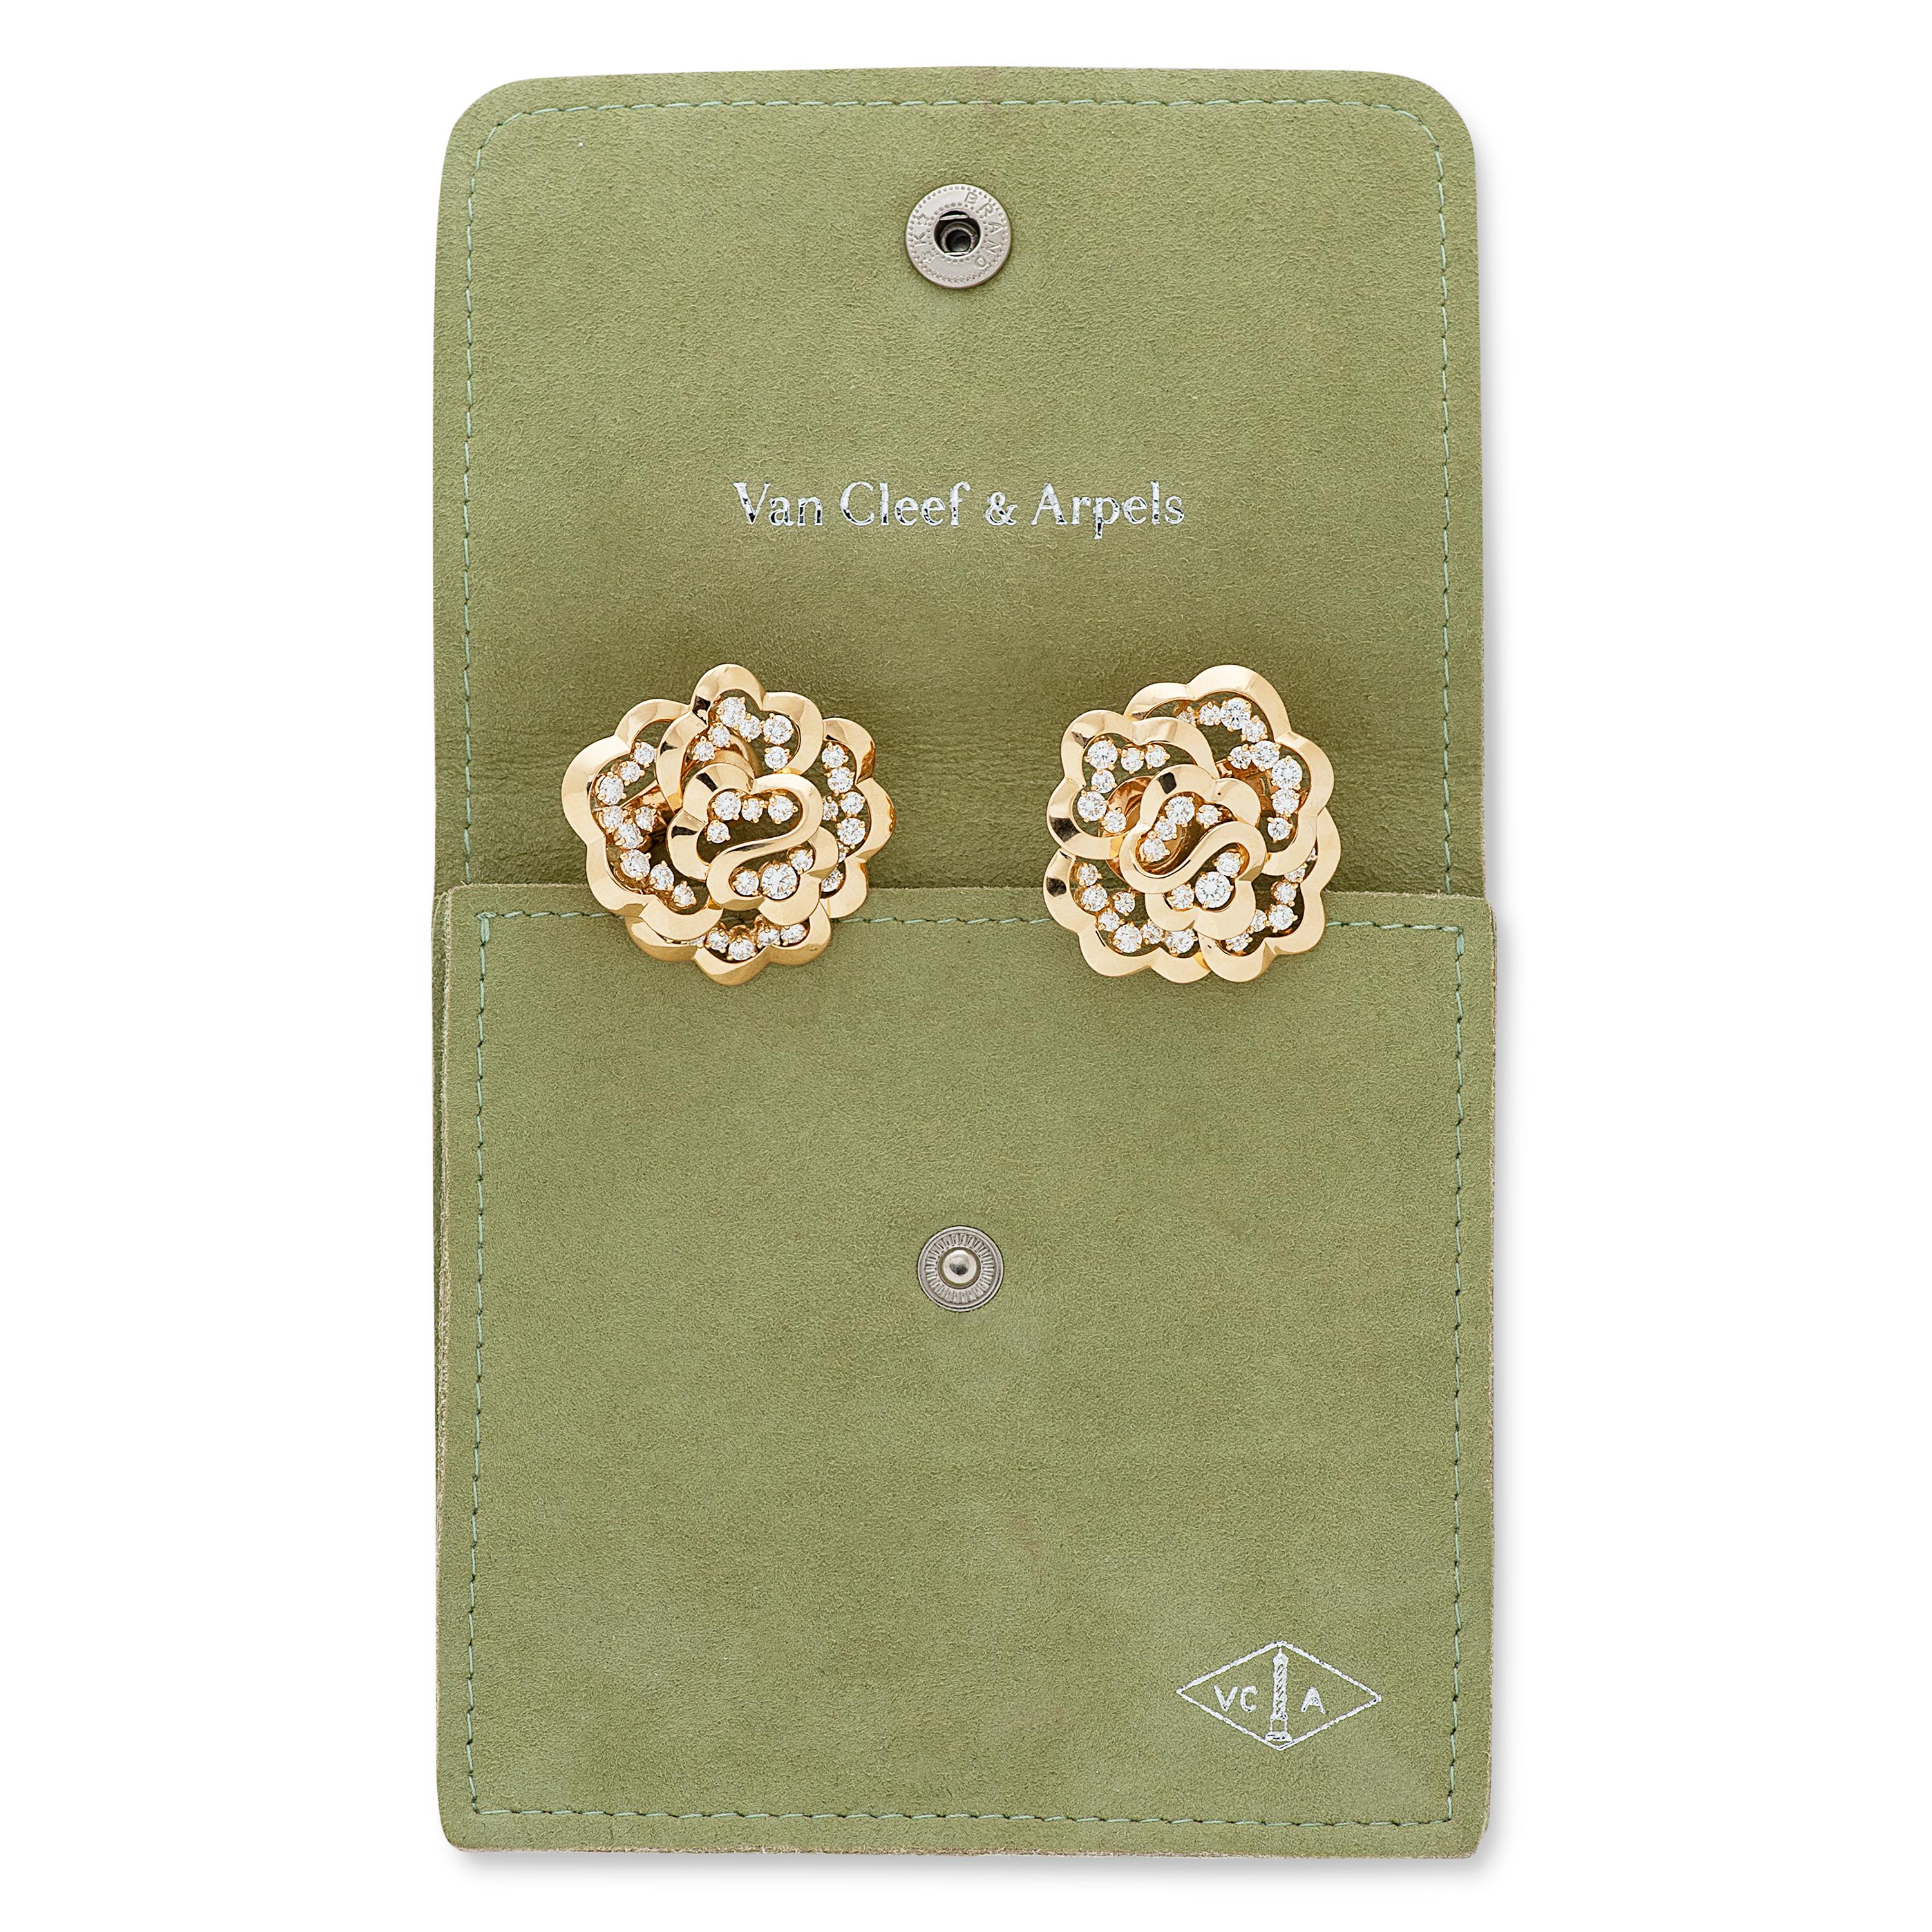 These vintage VCA flower style earrings feature 70 round brilliant cut diamonds totaling approximately 2.80 carats with F+ color and VS clarity set in 18k yellow gold. 

They measure approximately 1.25